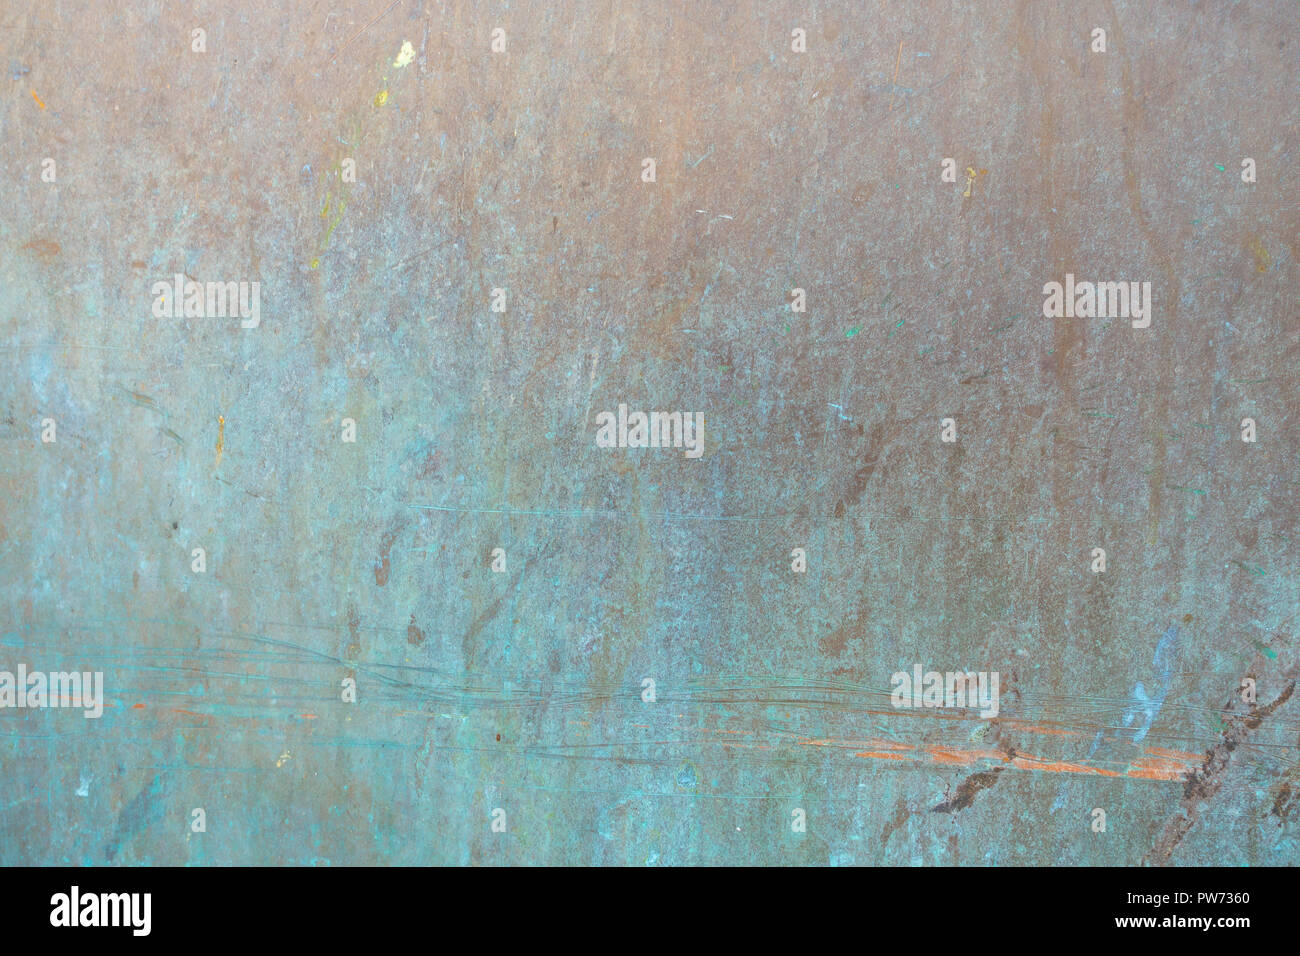 stained steel wall ground plate full frame image background Stock Photo